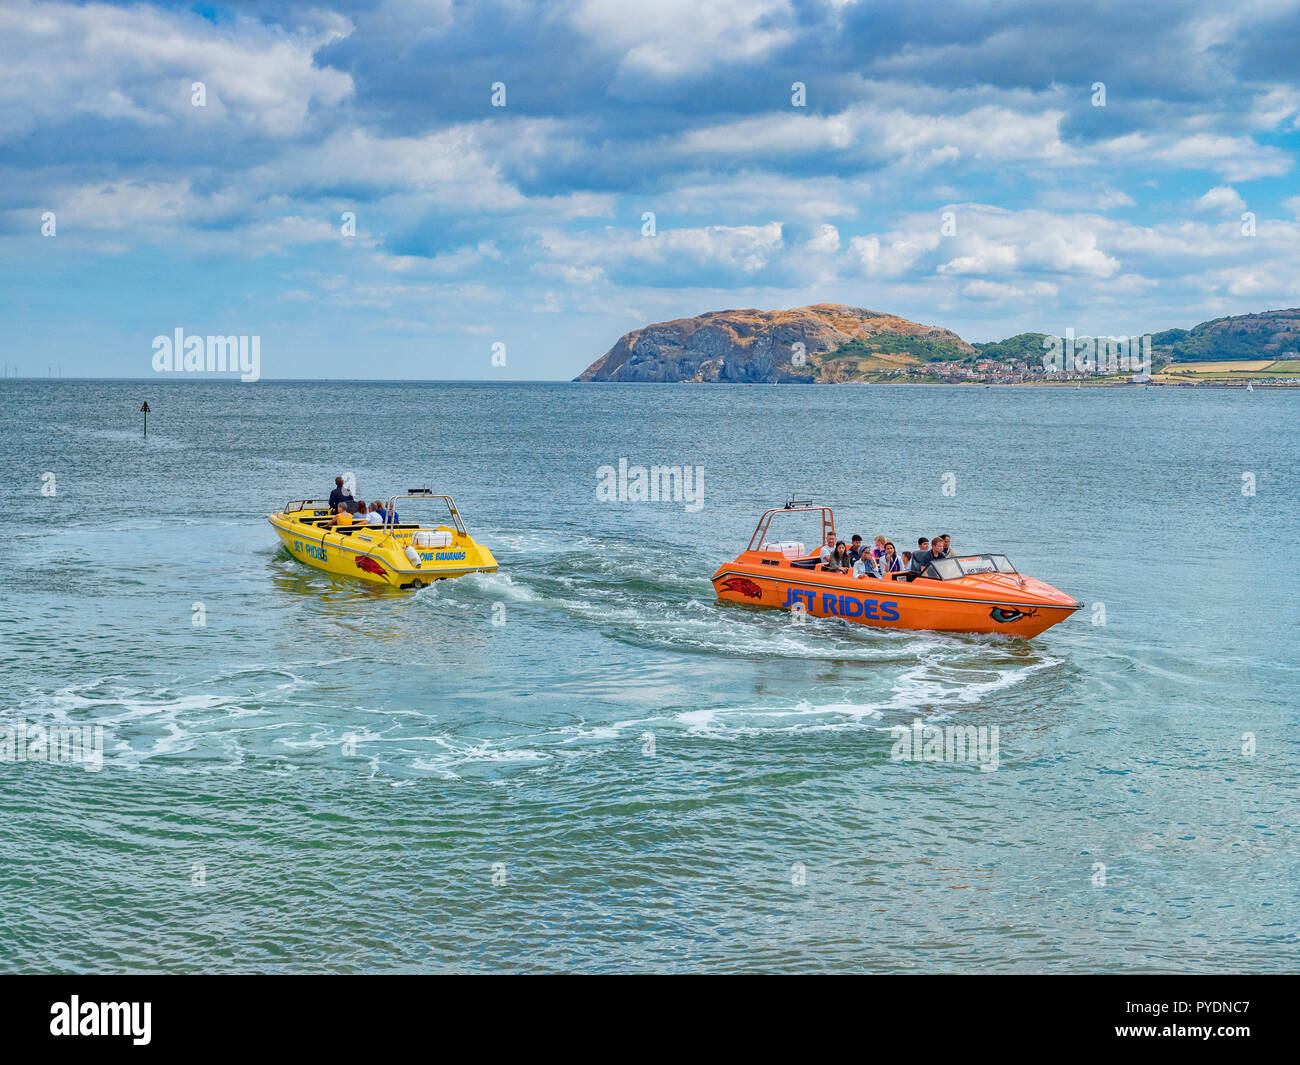 15 July 2018: Llandudno, Conwy, UK - Jet boat rides in the bay, with the Little Orme in the background. Stock Photo